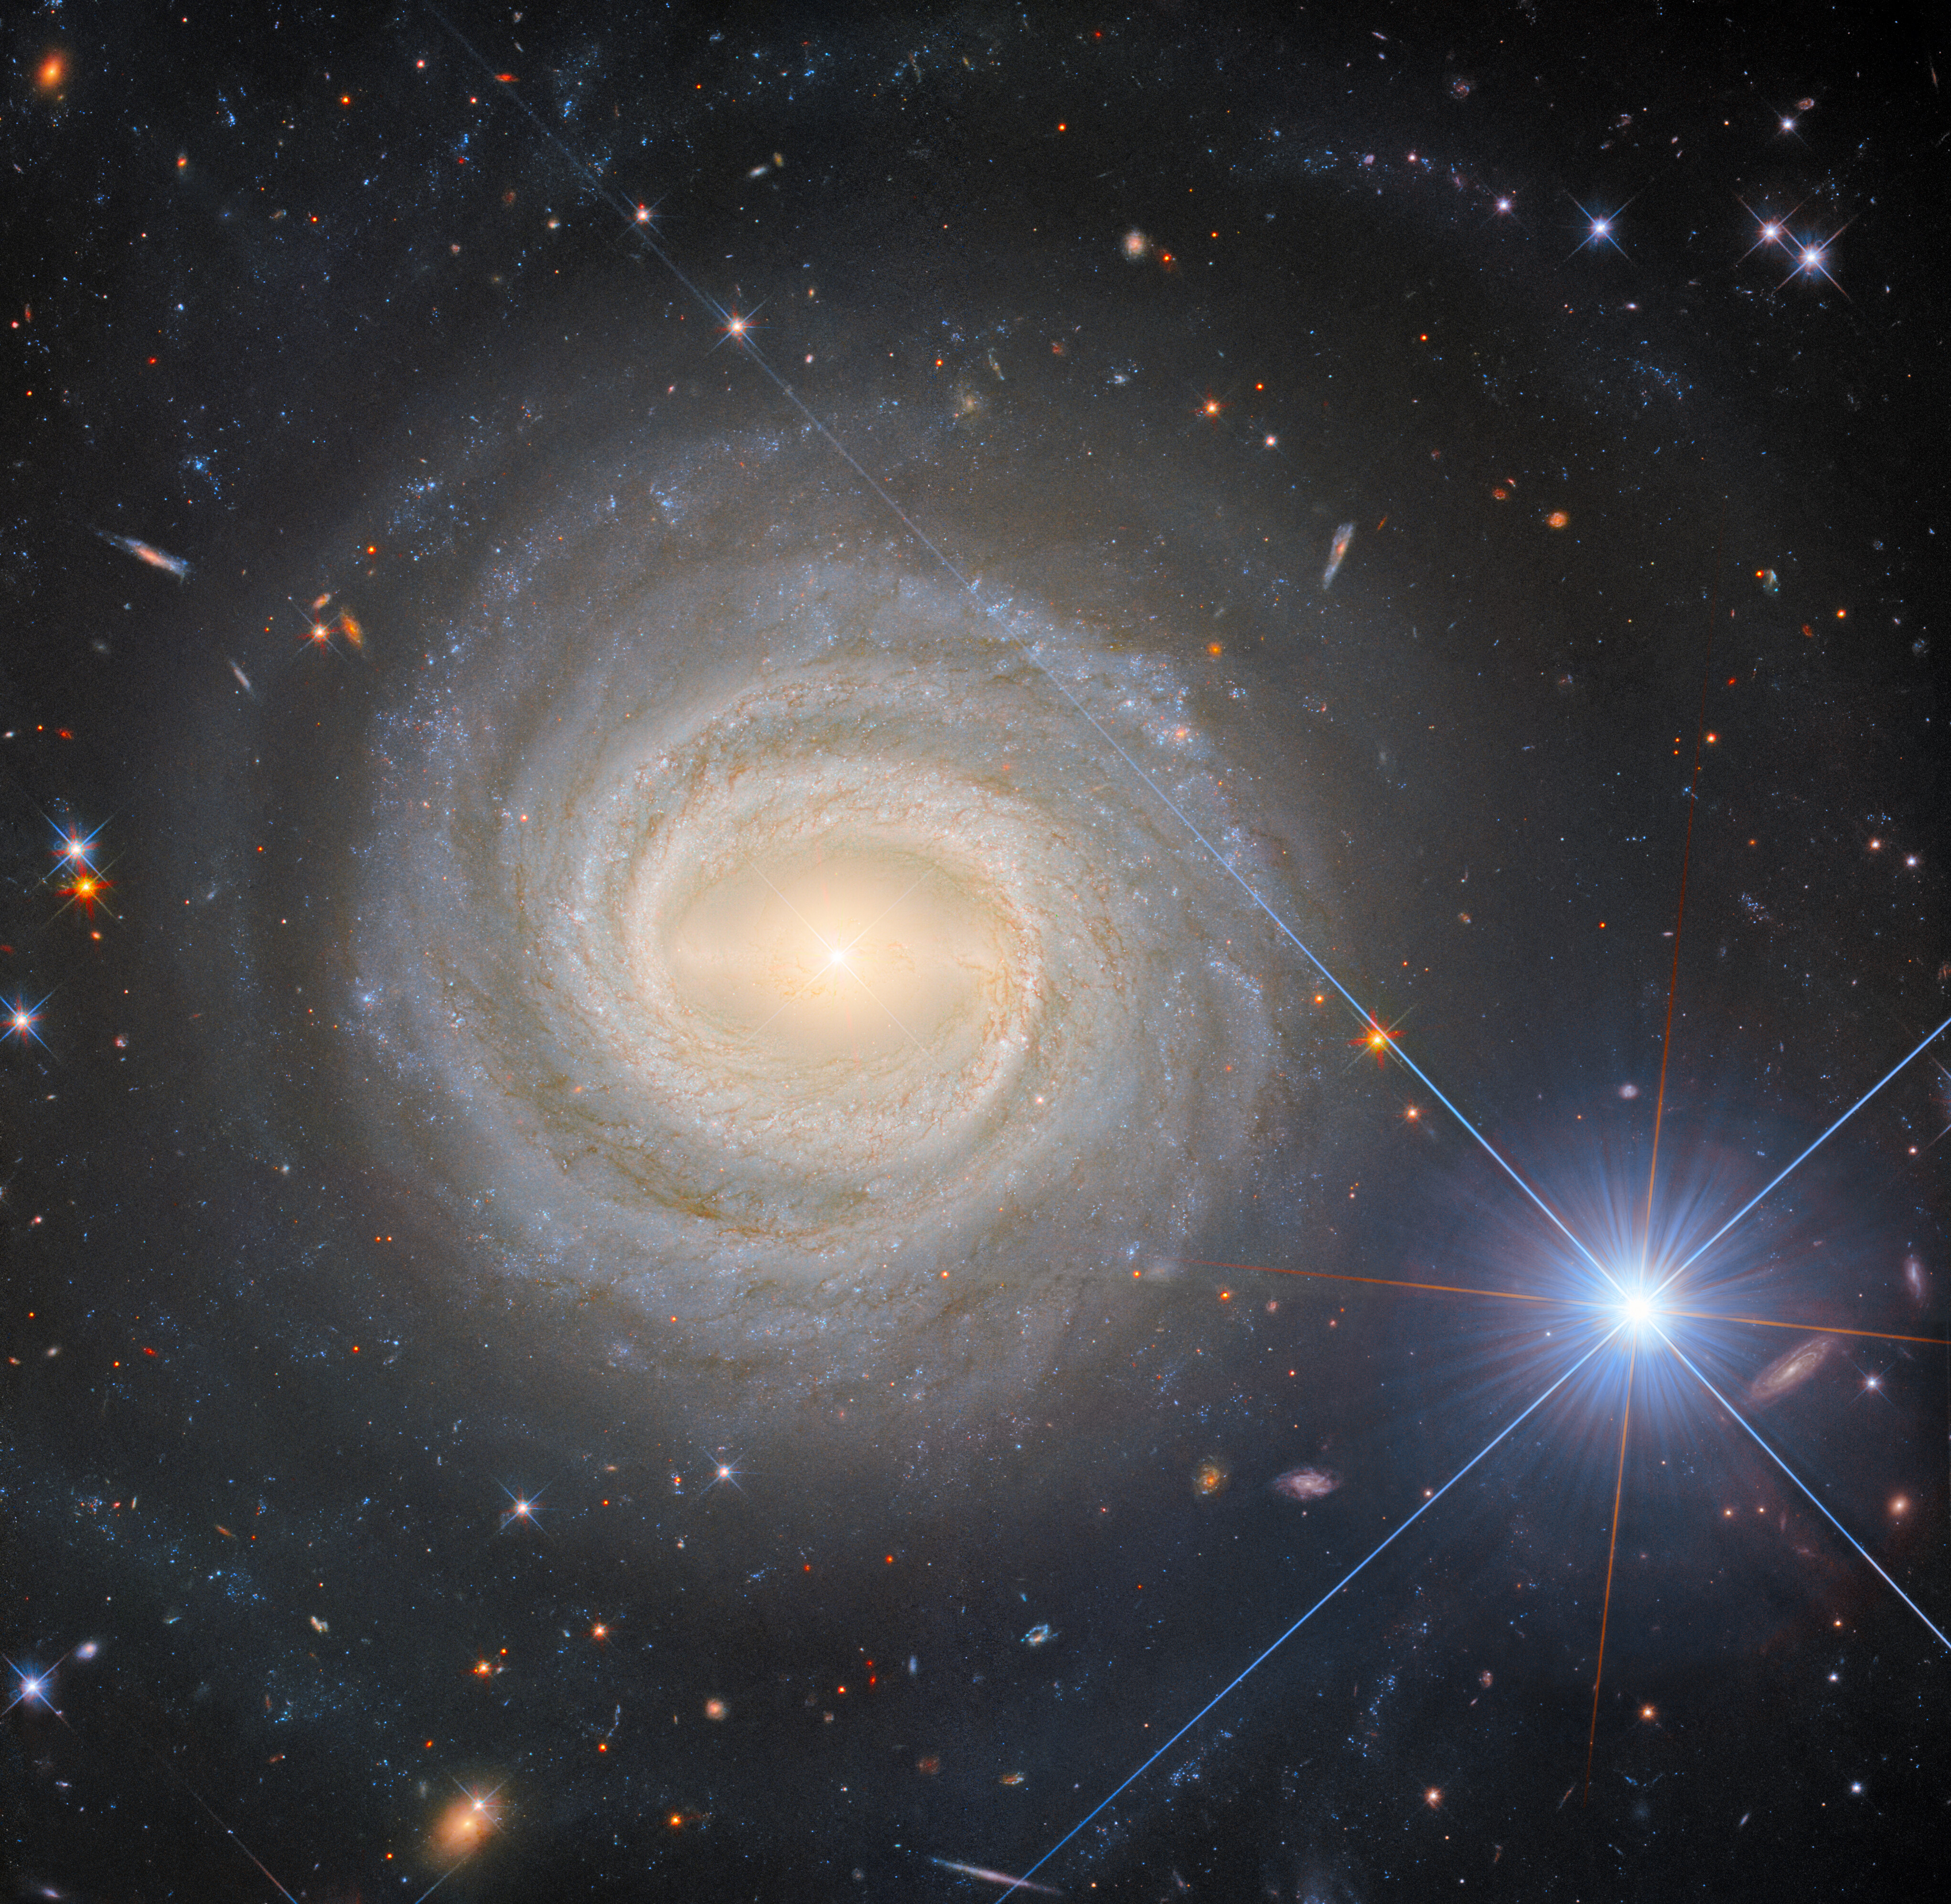 A spiral galaxy, peeped face-on ta tha viewer n' shit. Da bright centa of tha galaxy is crossed by a glowin bar, n' it is surrounded by tightly wound spiral arms, formin a cold-ass lil circular shape wit relatively clear edges. Faraway galaxies is visible round it, along wit all dem bright stars, on a thugged-out dark background. Y'all KNOW dat shit, muthafucka! One star ta tha right of tha galaxy is straight-up big-ass n' mad bright wit long diffraction spikes.